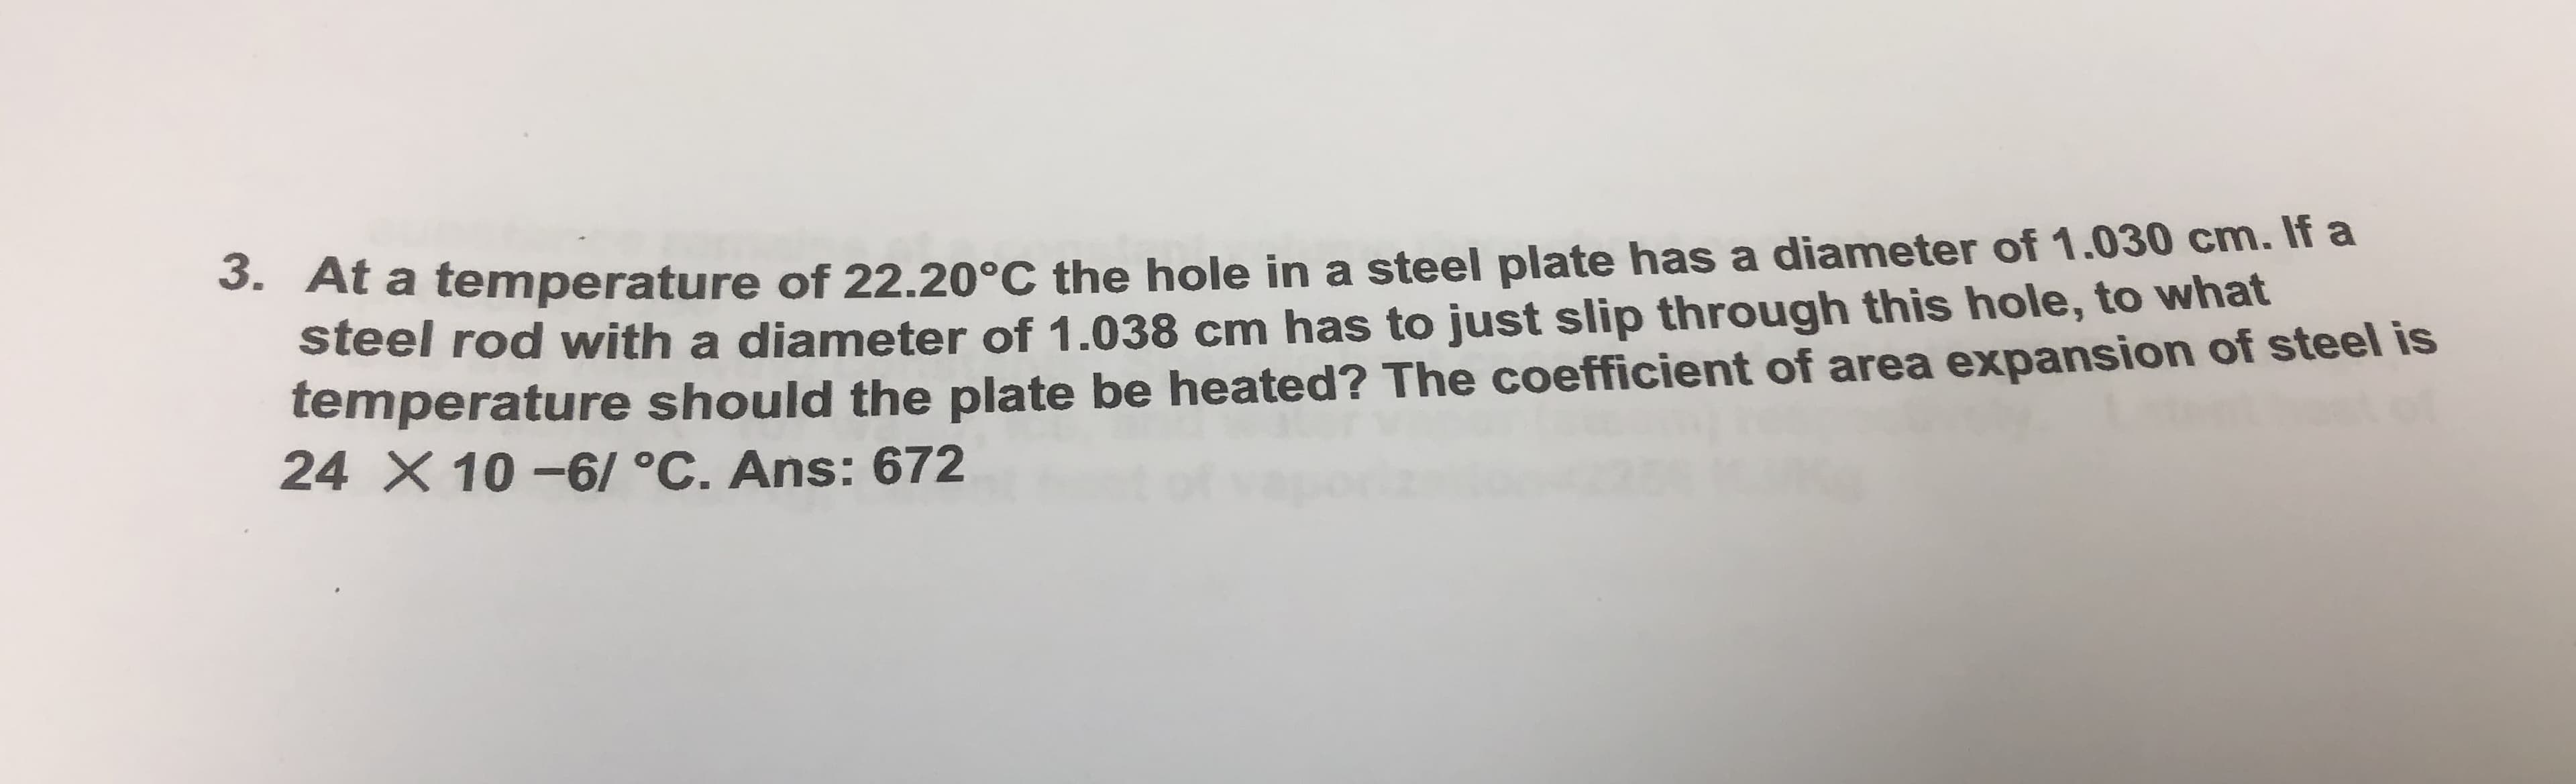 S. At a temperature of 22.20°C the hole in a steel plate has a diameter of 1.030 cm. If a
steel rod with a diameter of 1.038 cm has to just slip through this hole, to what
temperature should the plate be heated? The coefficient of area expansion of steel is
24 X 10 -6/ °C. Ans: 672
